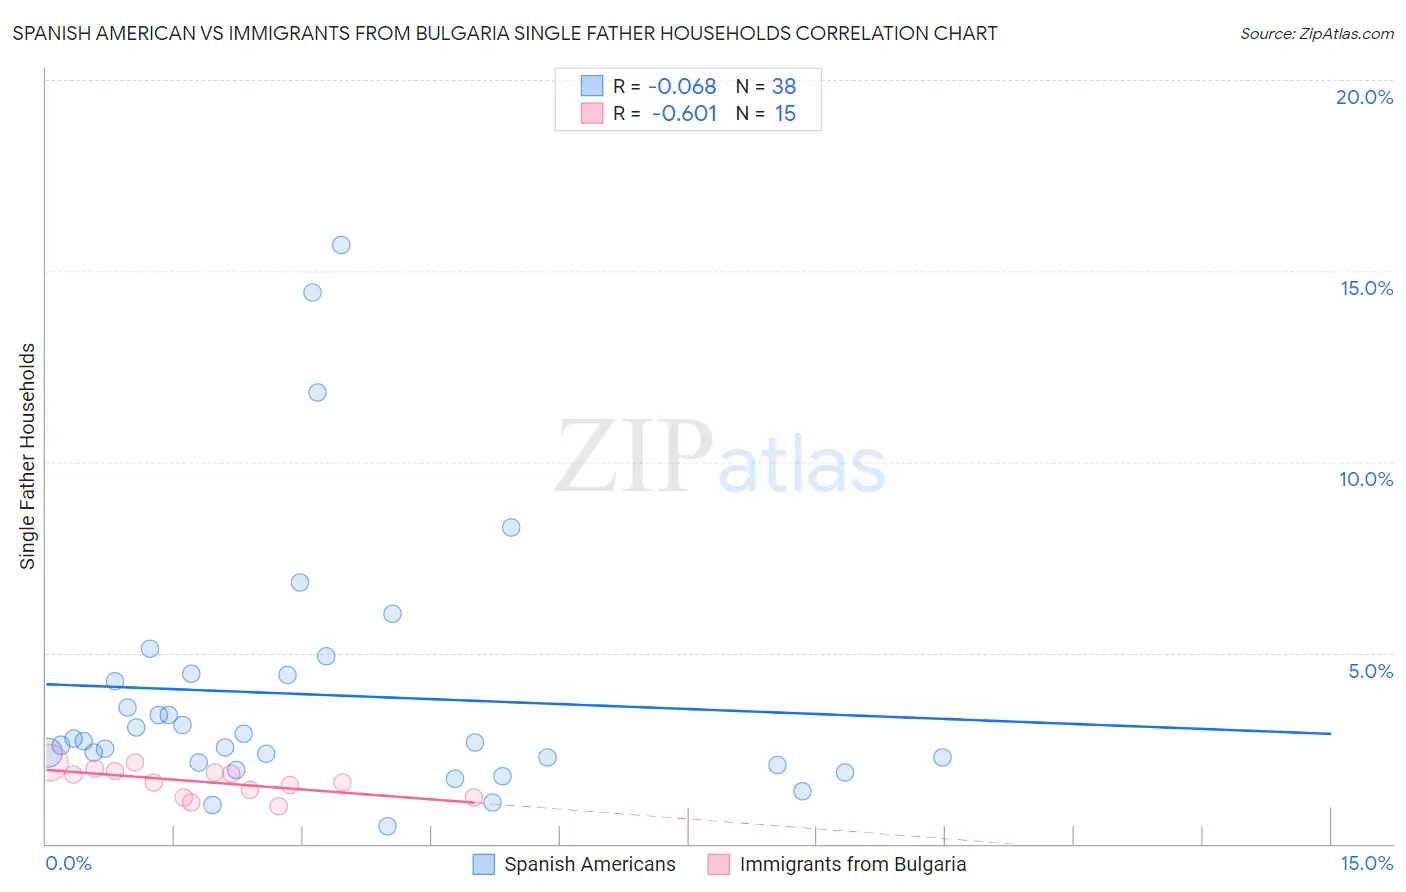 Spanish American vs Immigrants from Bulgaria Single Father Households